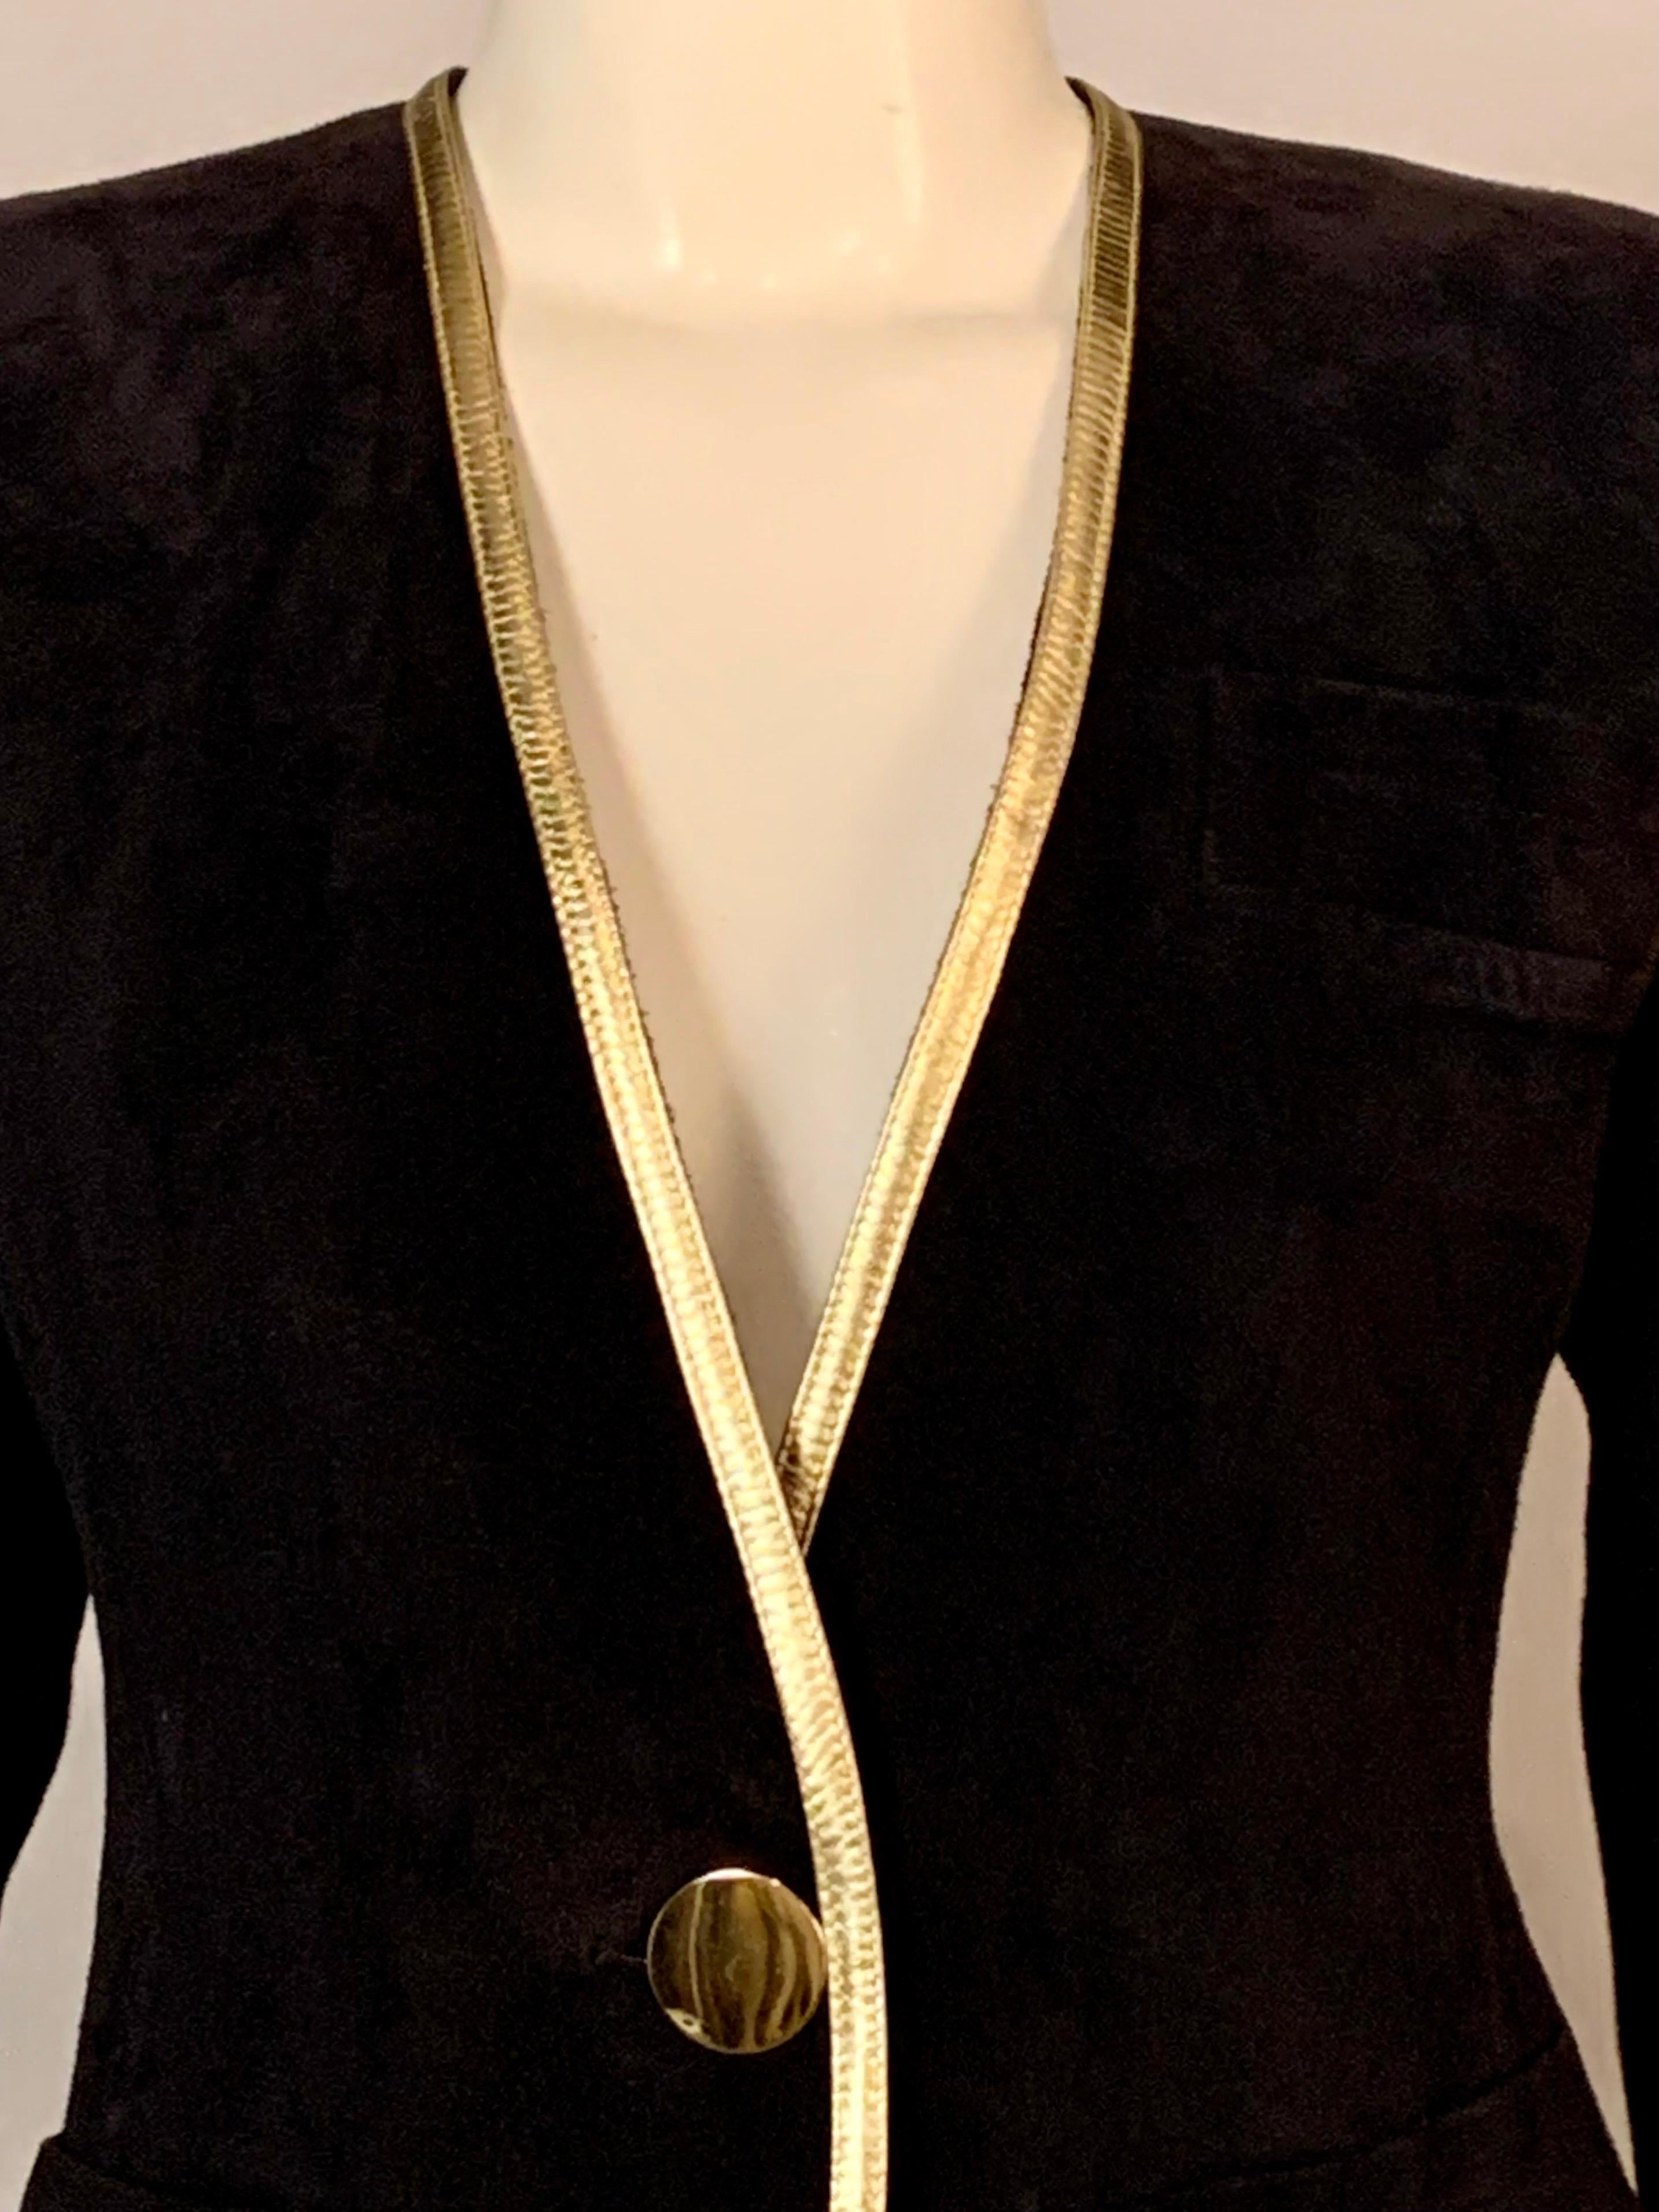 Yves Saint Laurent Black Suede Jacket with Gold Leather Trim For Sale 1